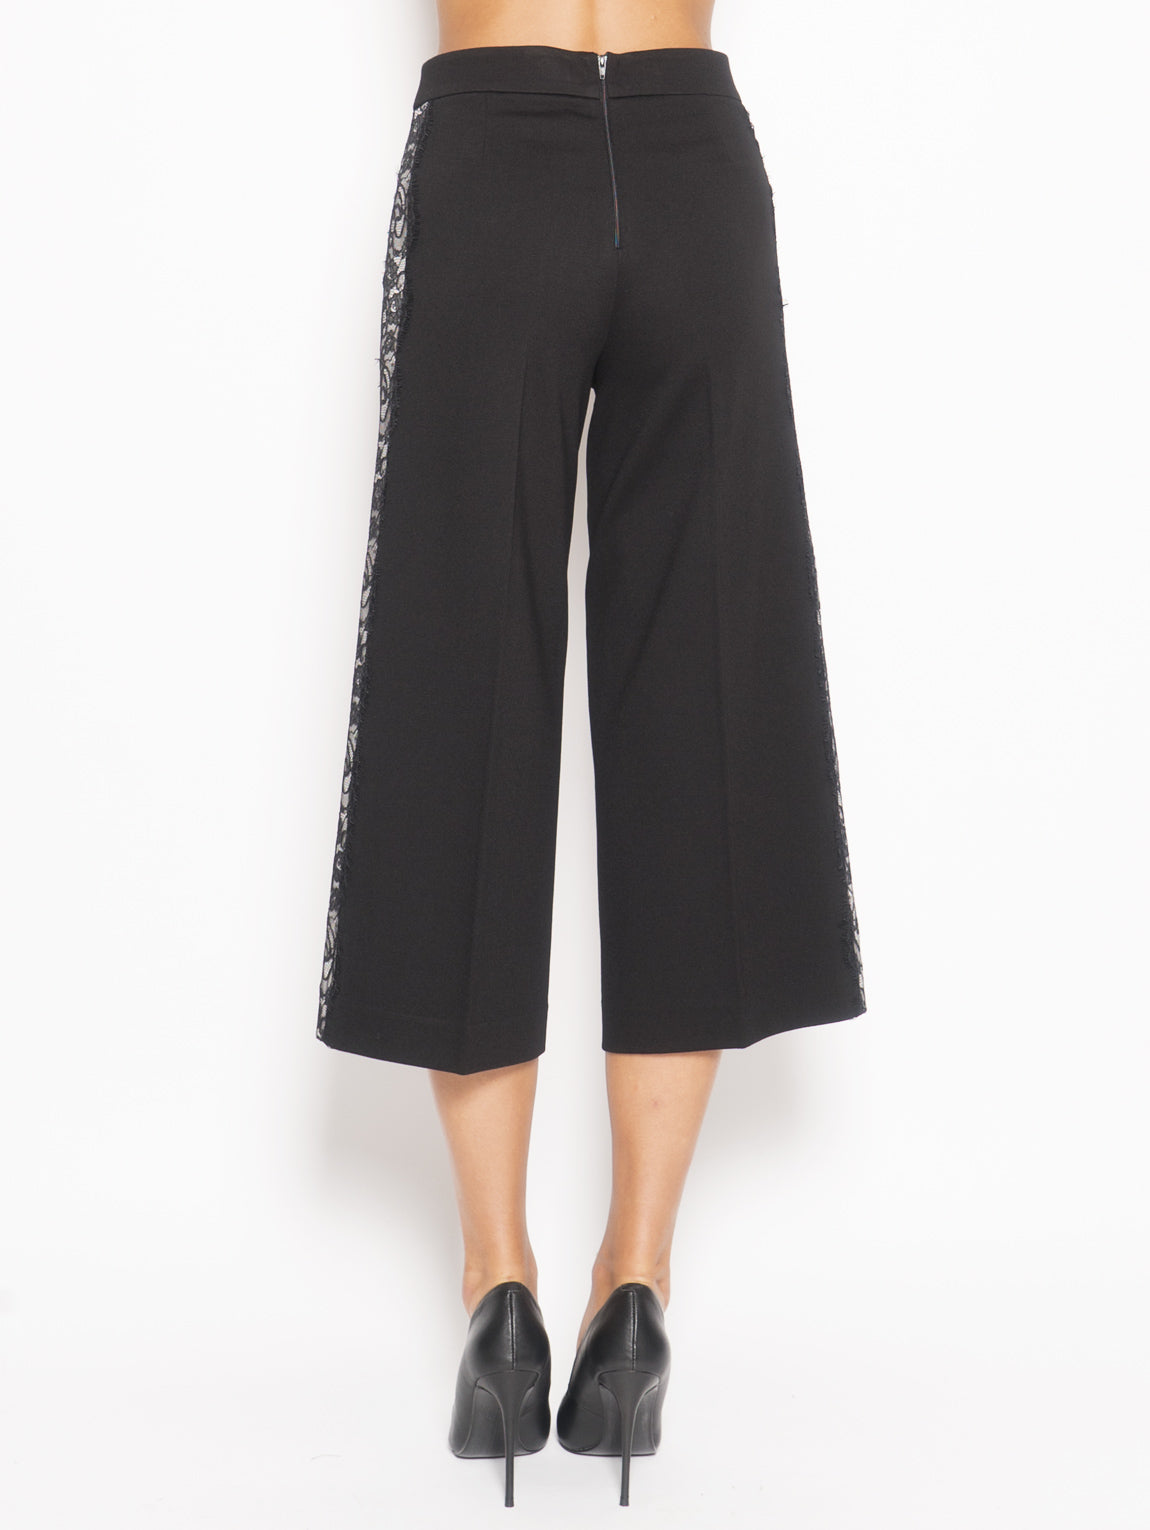 Pants with black lace